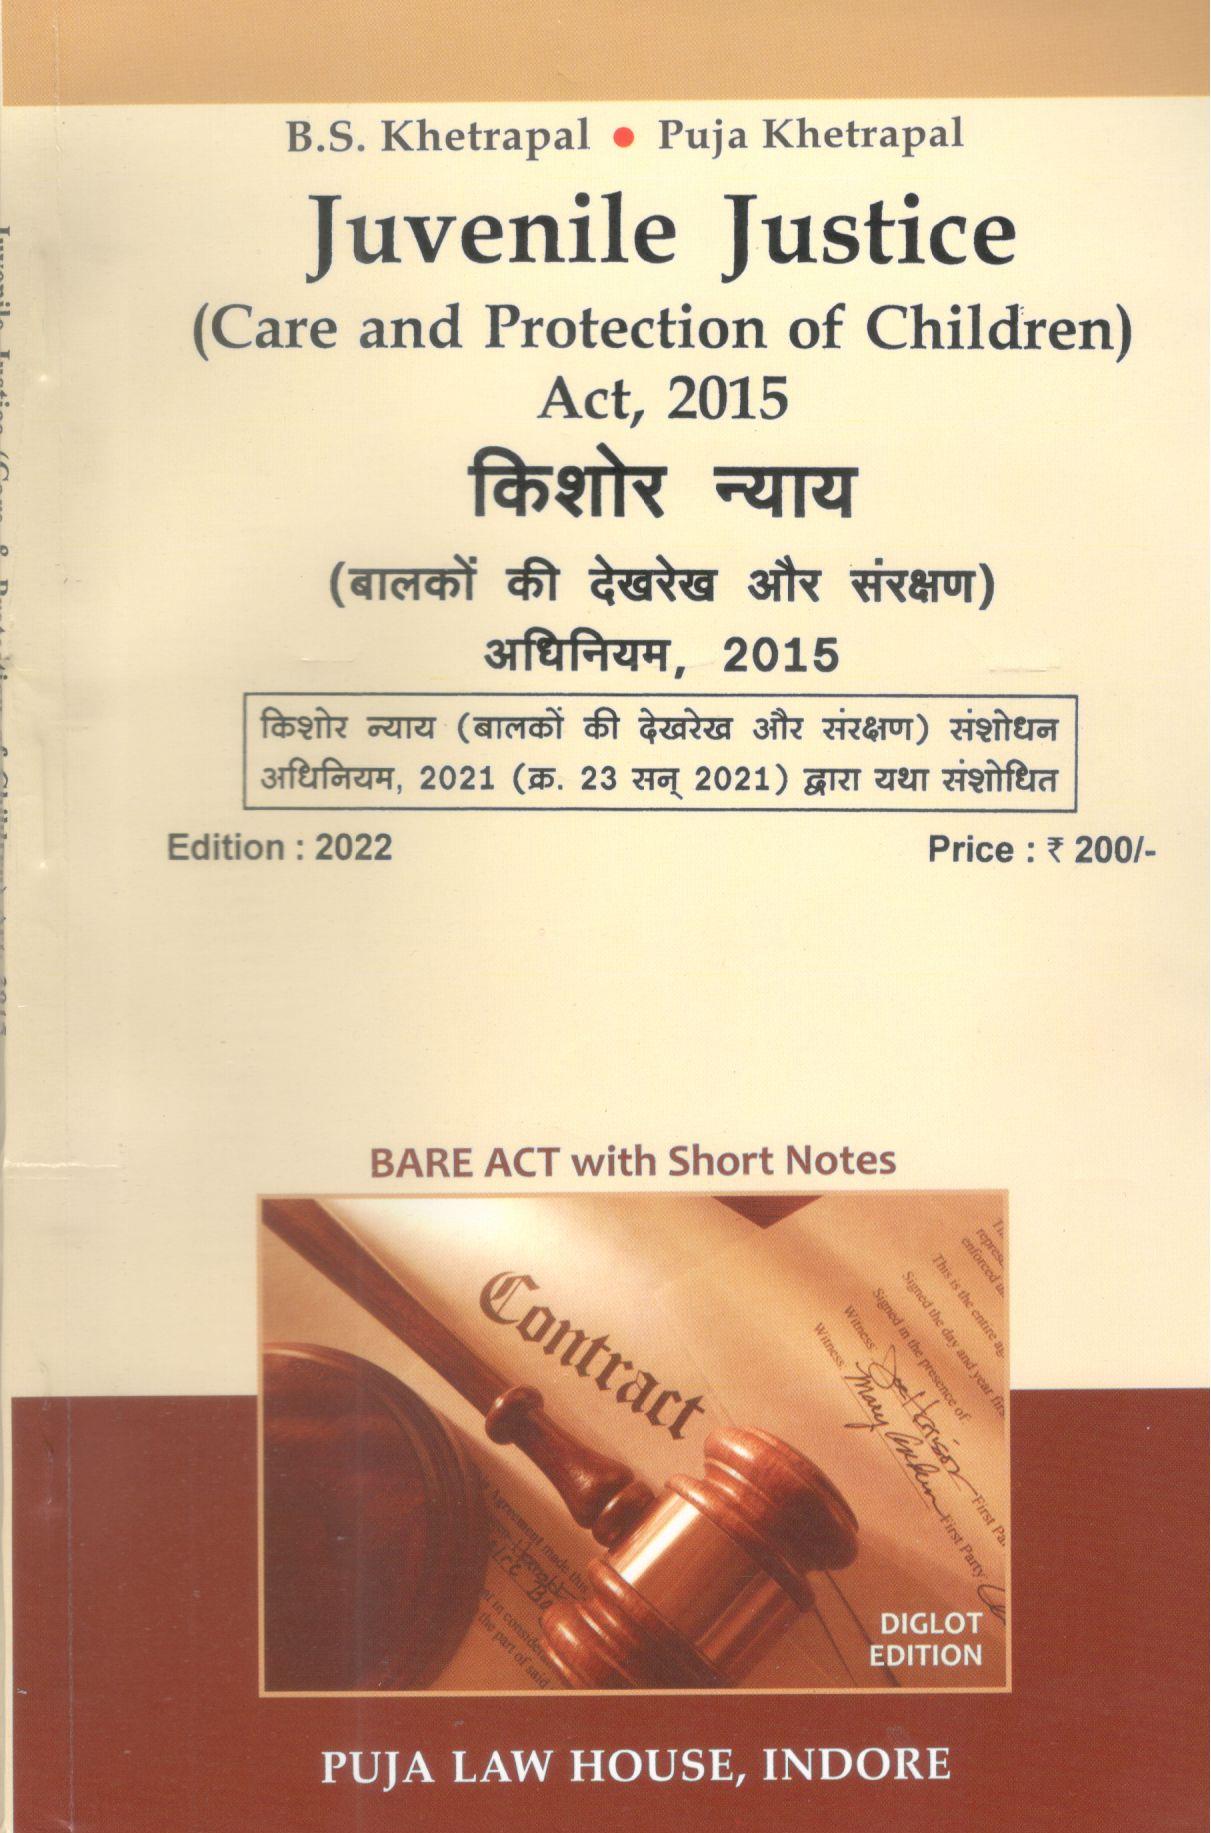  Buy Juvenile Justice (Care and Protection of Children) Act, 2015 / किशोर न्याय (बालको की देख-रेख और संरक्षण) अधिनियम, 2015